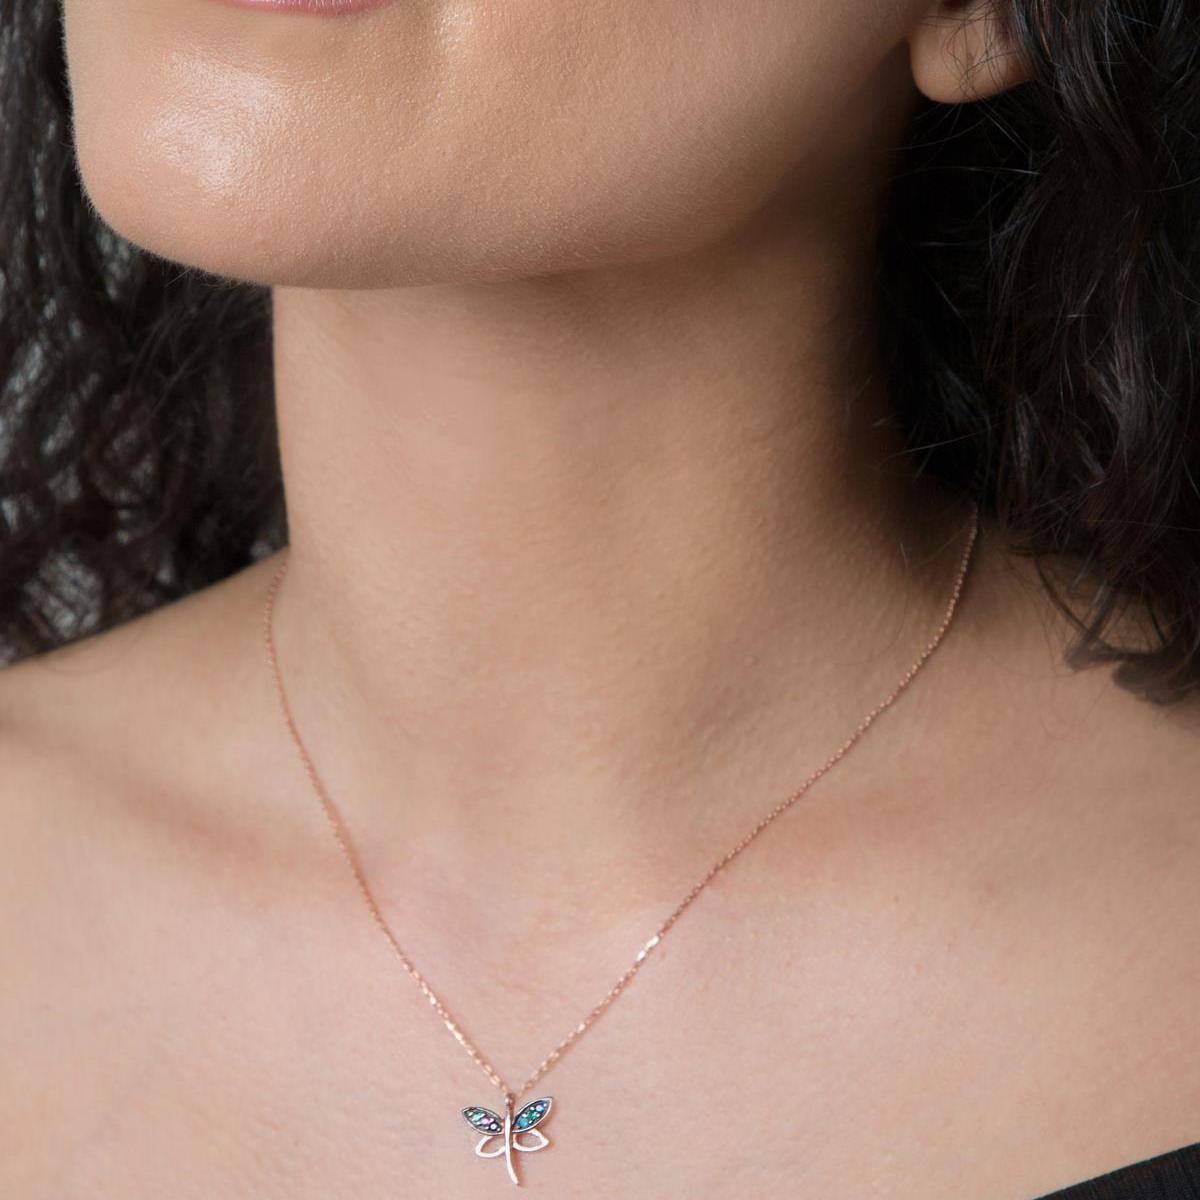 Dragonfly Diamond Necklace • Sterling Silver Dragonfly Necklace - Trending Silver Gifts